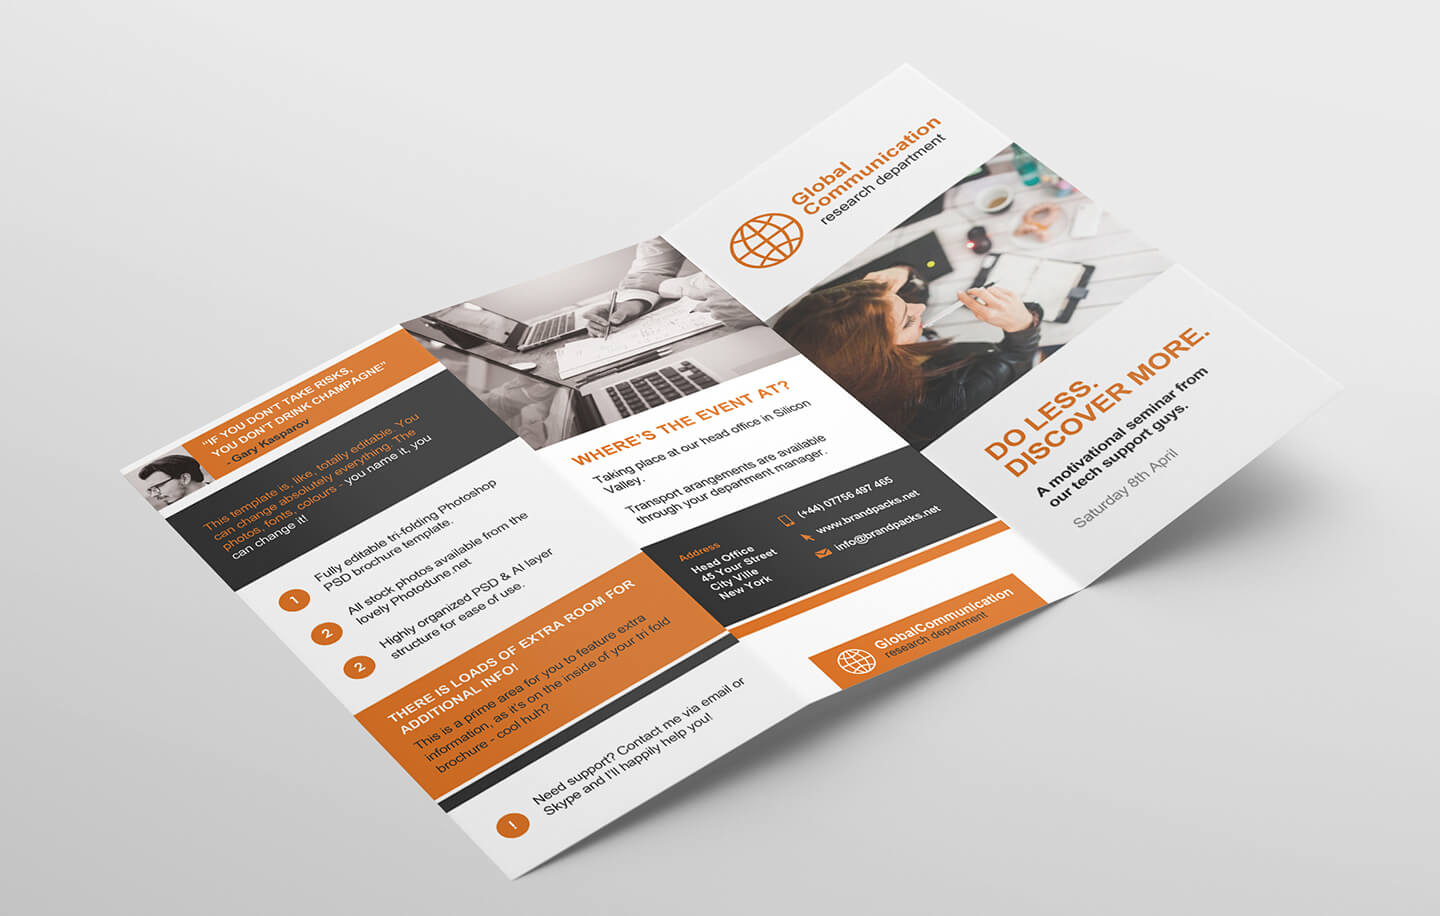 Free 3 Fold Brochure Template For Photoshop & Illustrator Regarding 3 Fold Brochure Template Psd Free Download